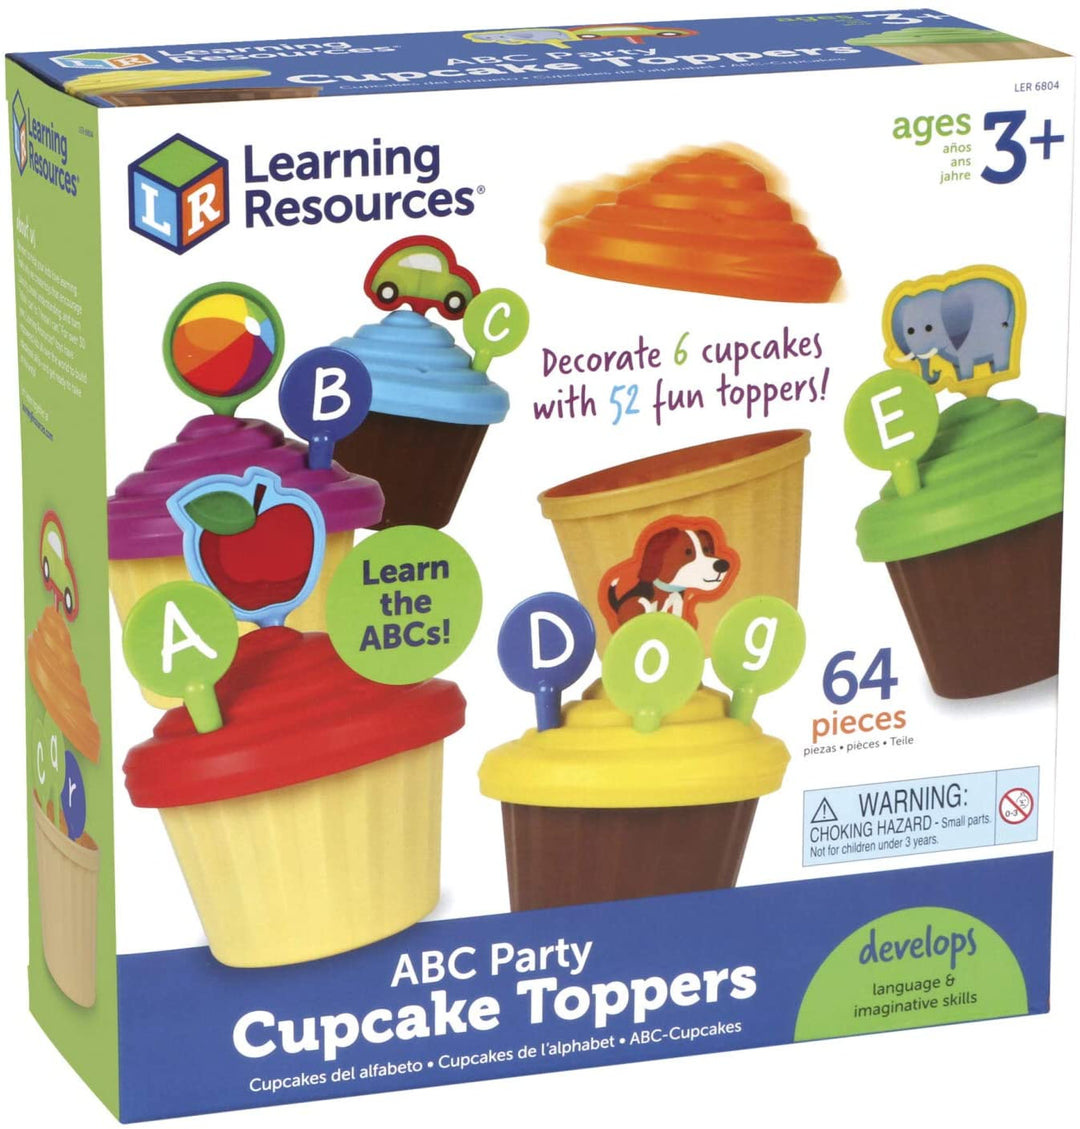 Learning Resources LER6804 ABC Party Cupcake Toppers